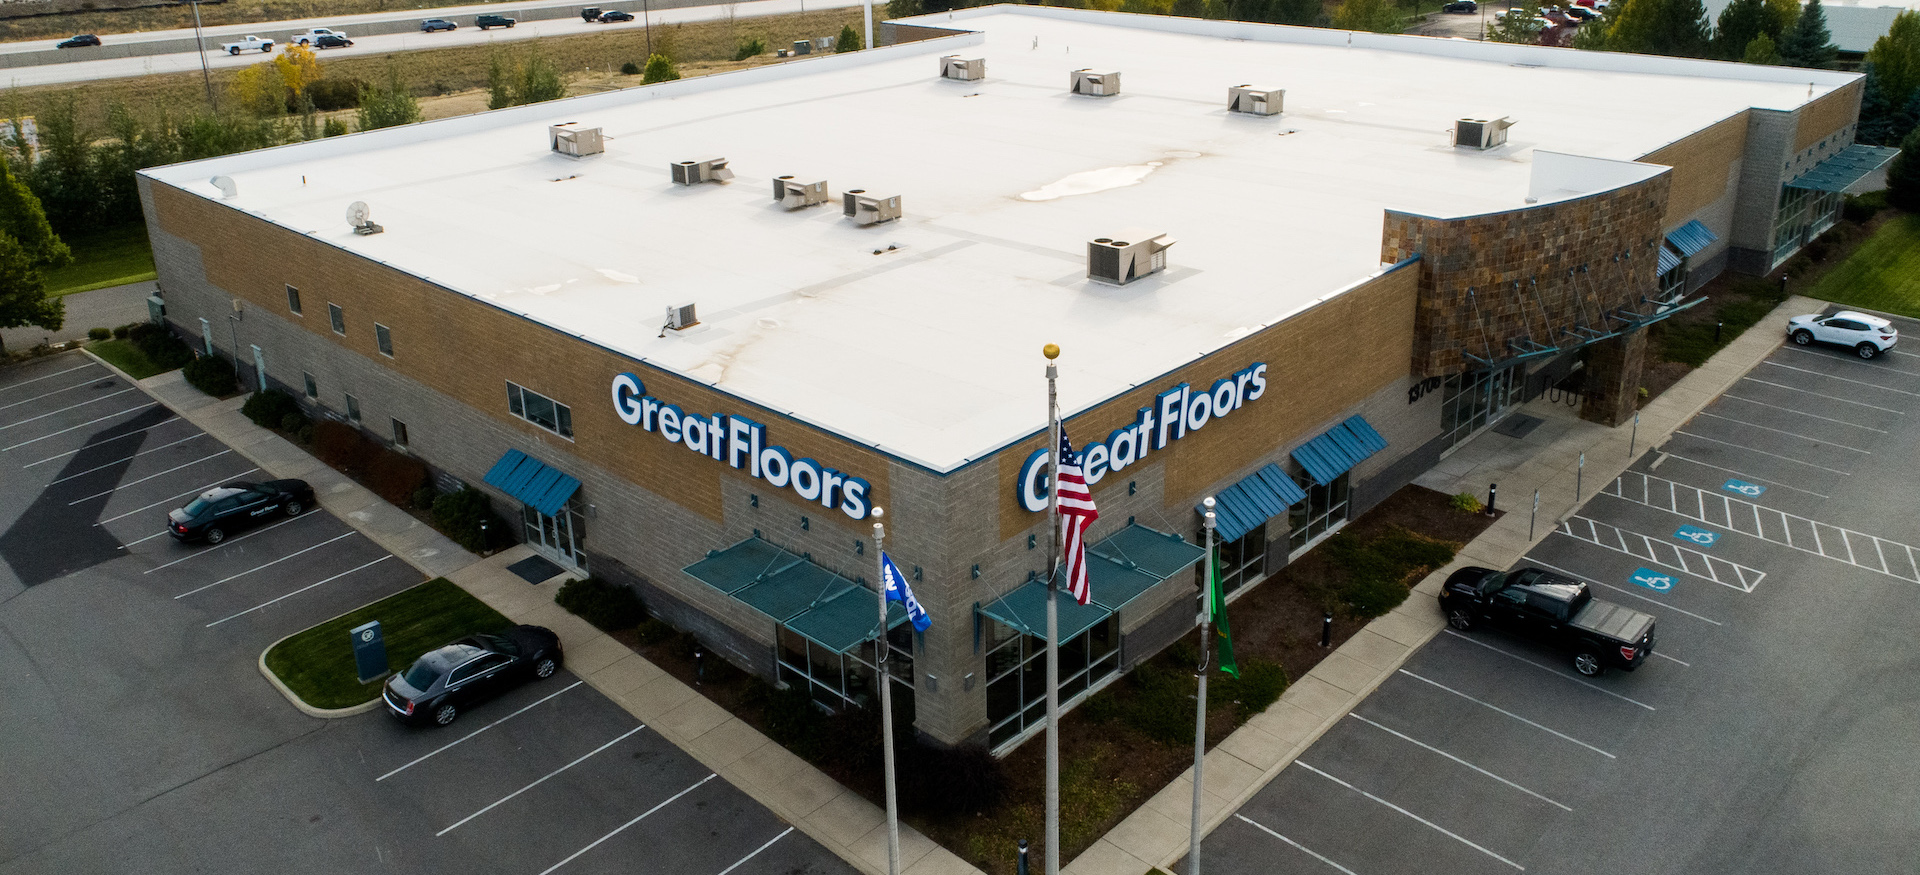 Great Floors Residential And Commercial Showroom Roof, Spokane Valley, Washington